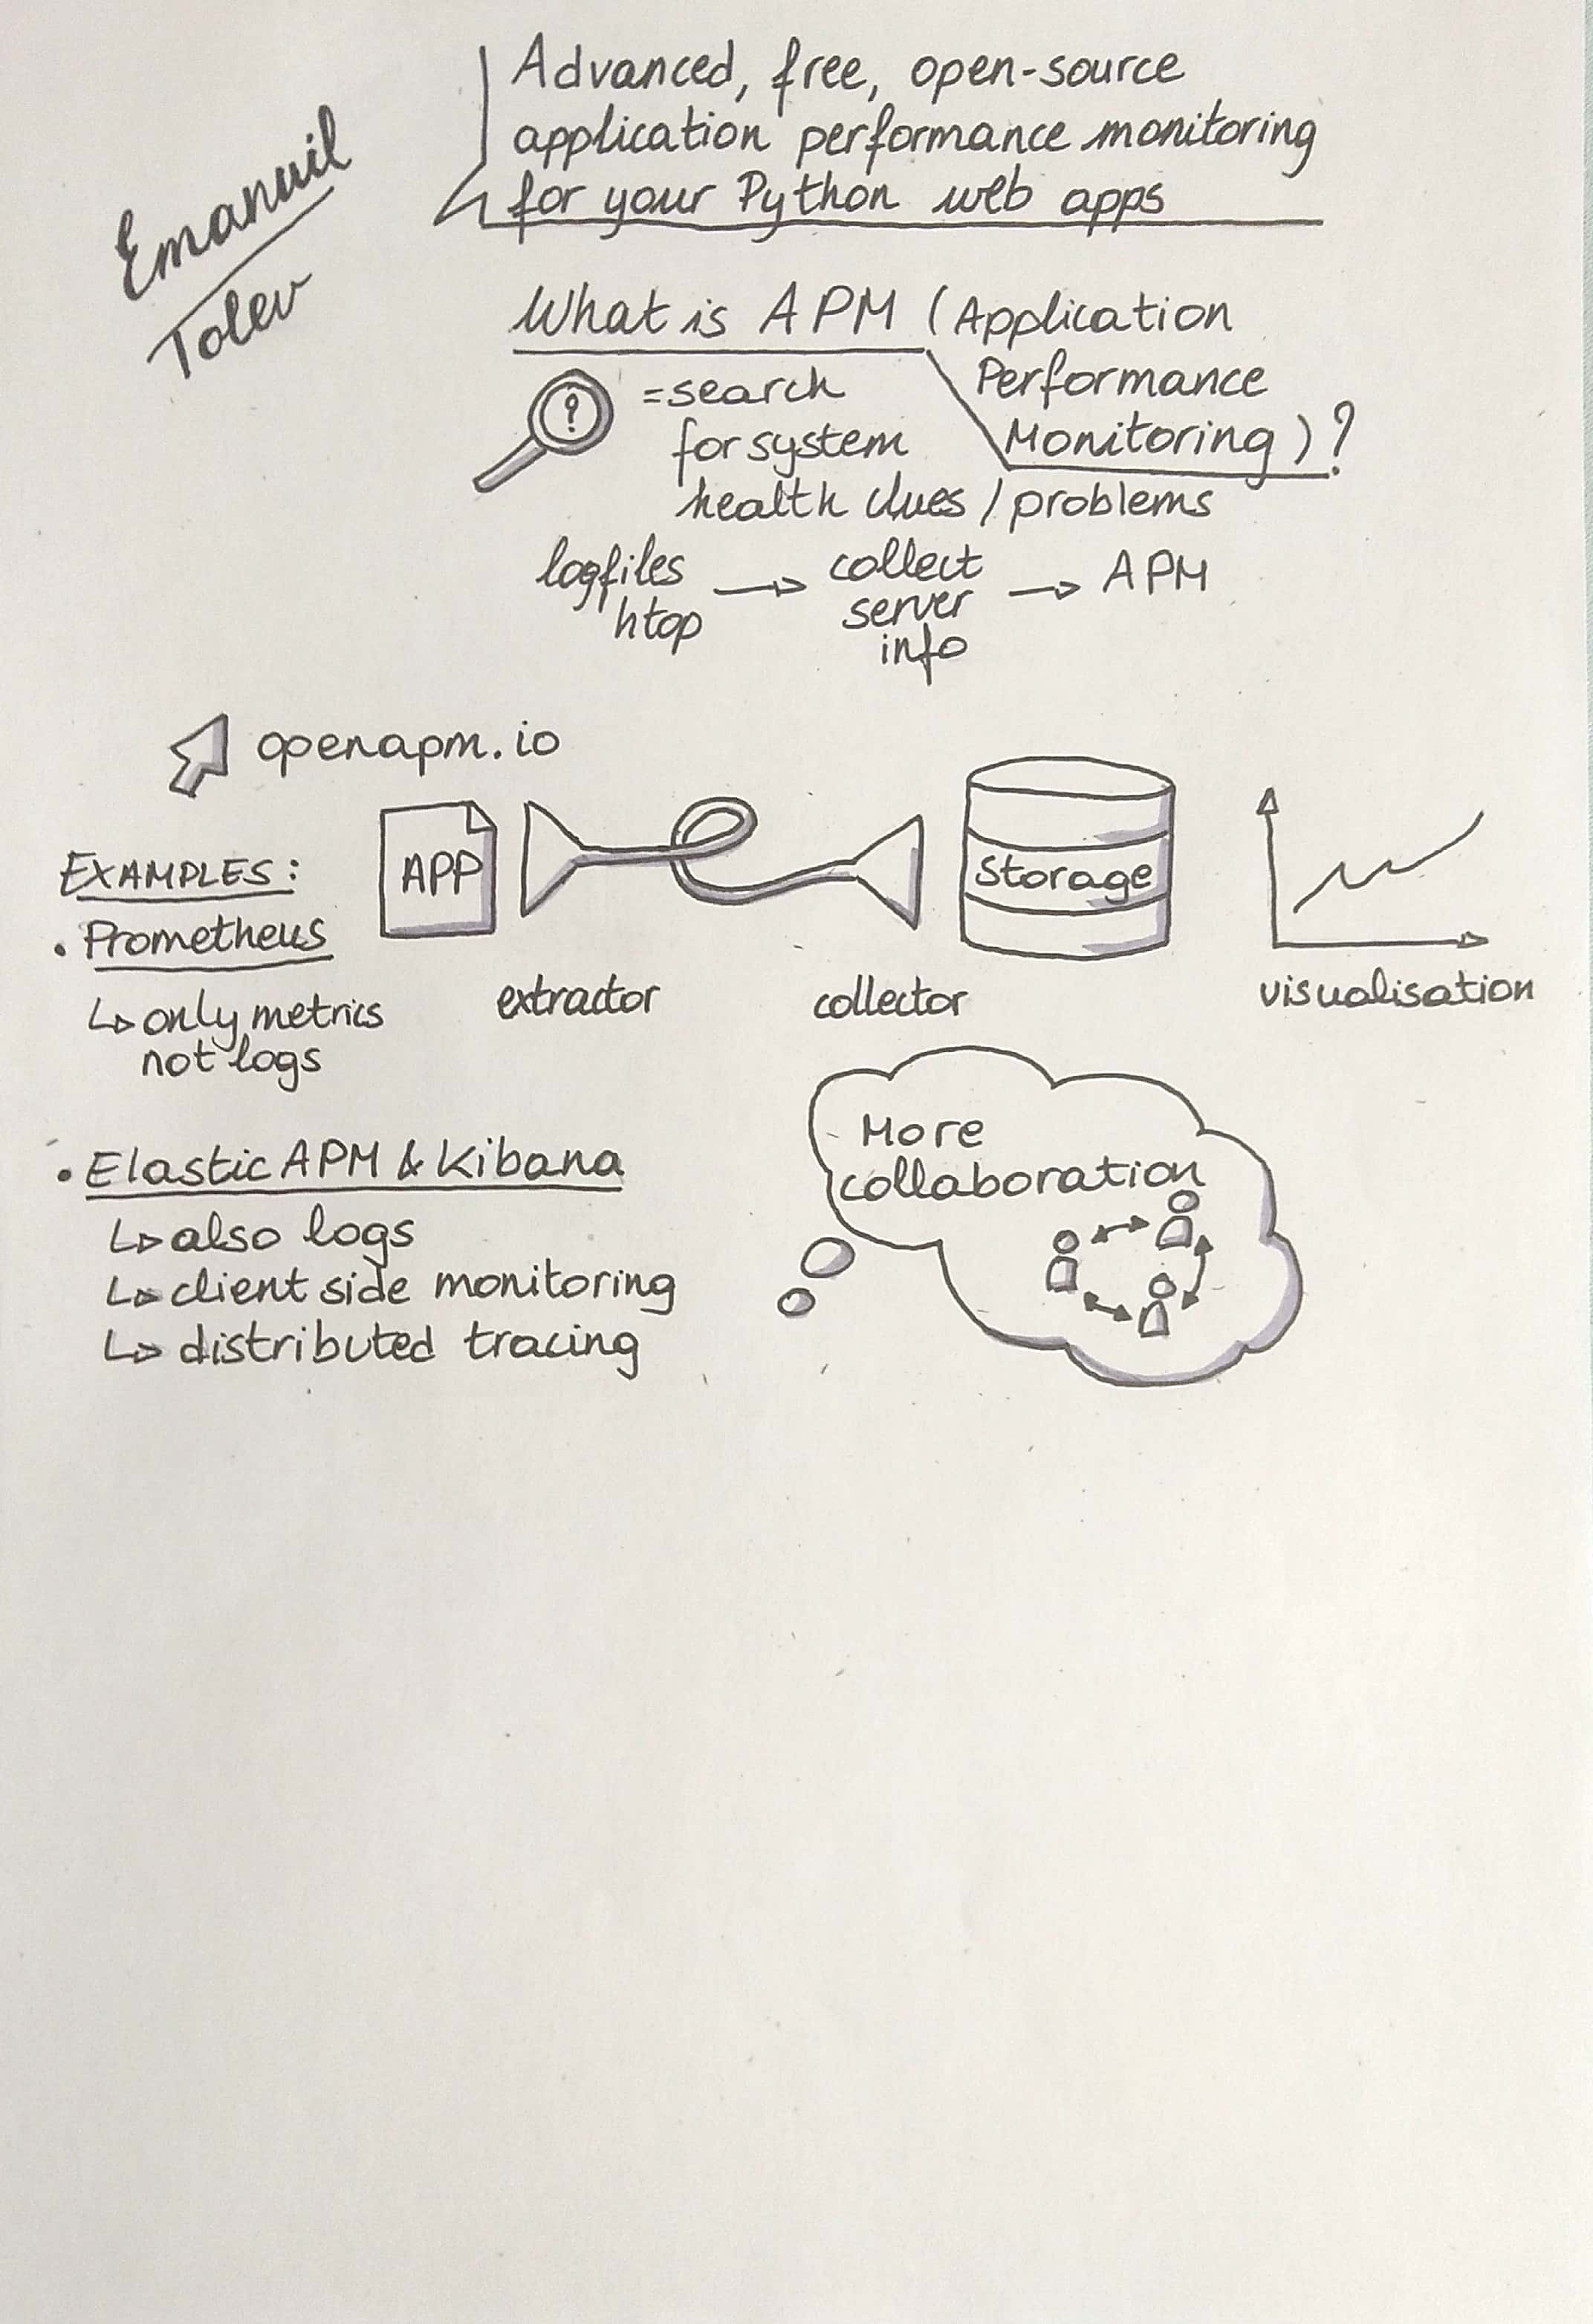 Sketchnote of Advanced, free, open-source application performance monitoring for your Python web apps